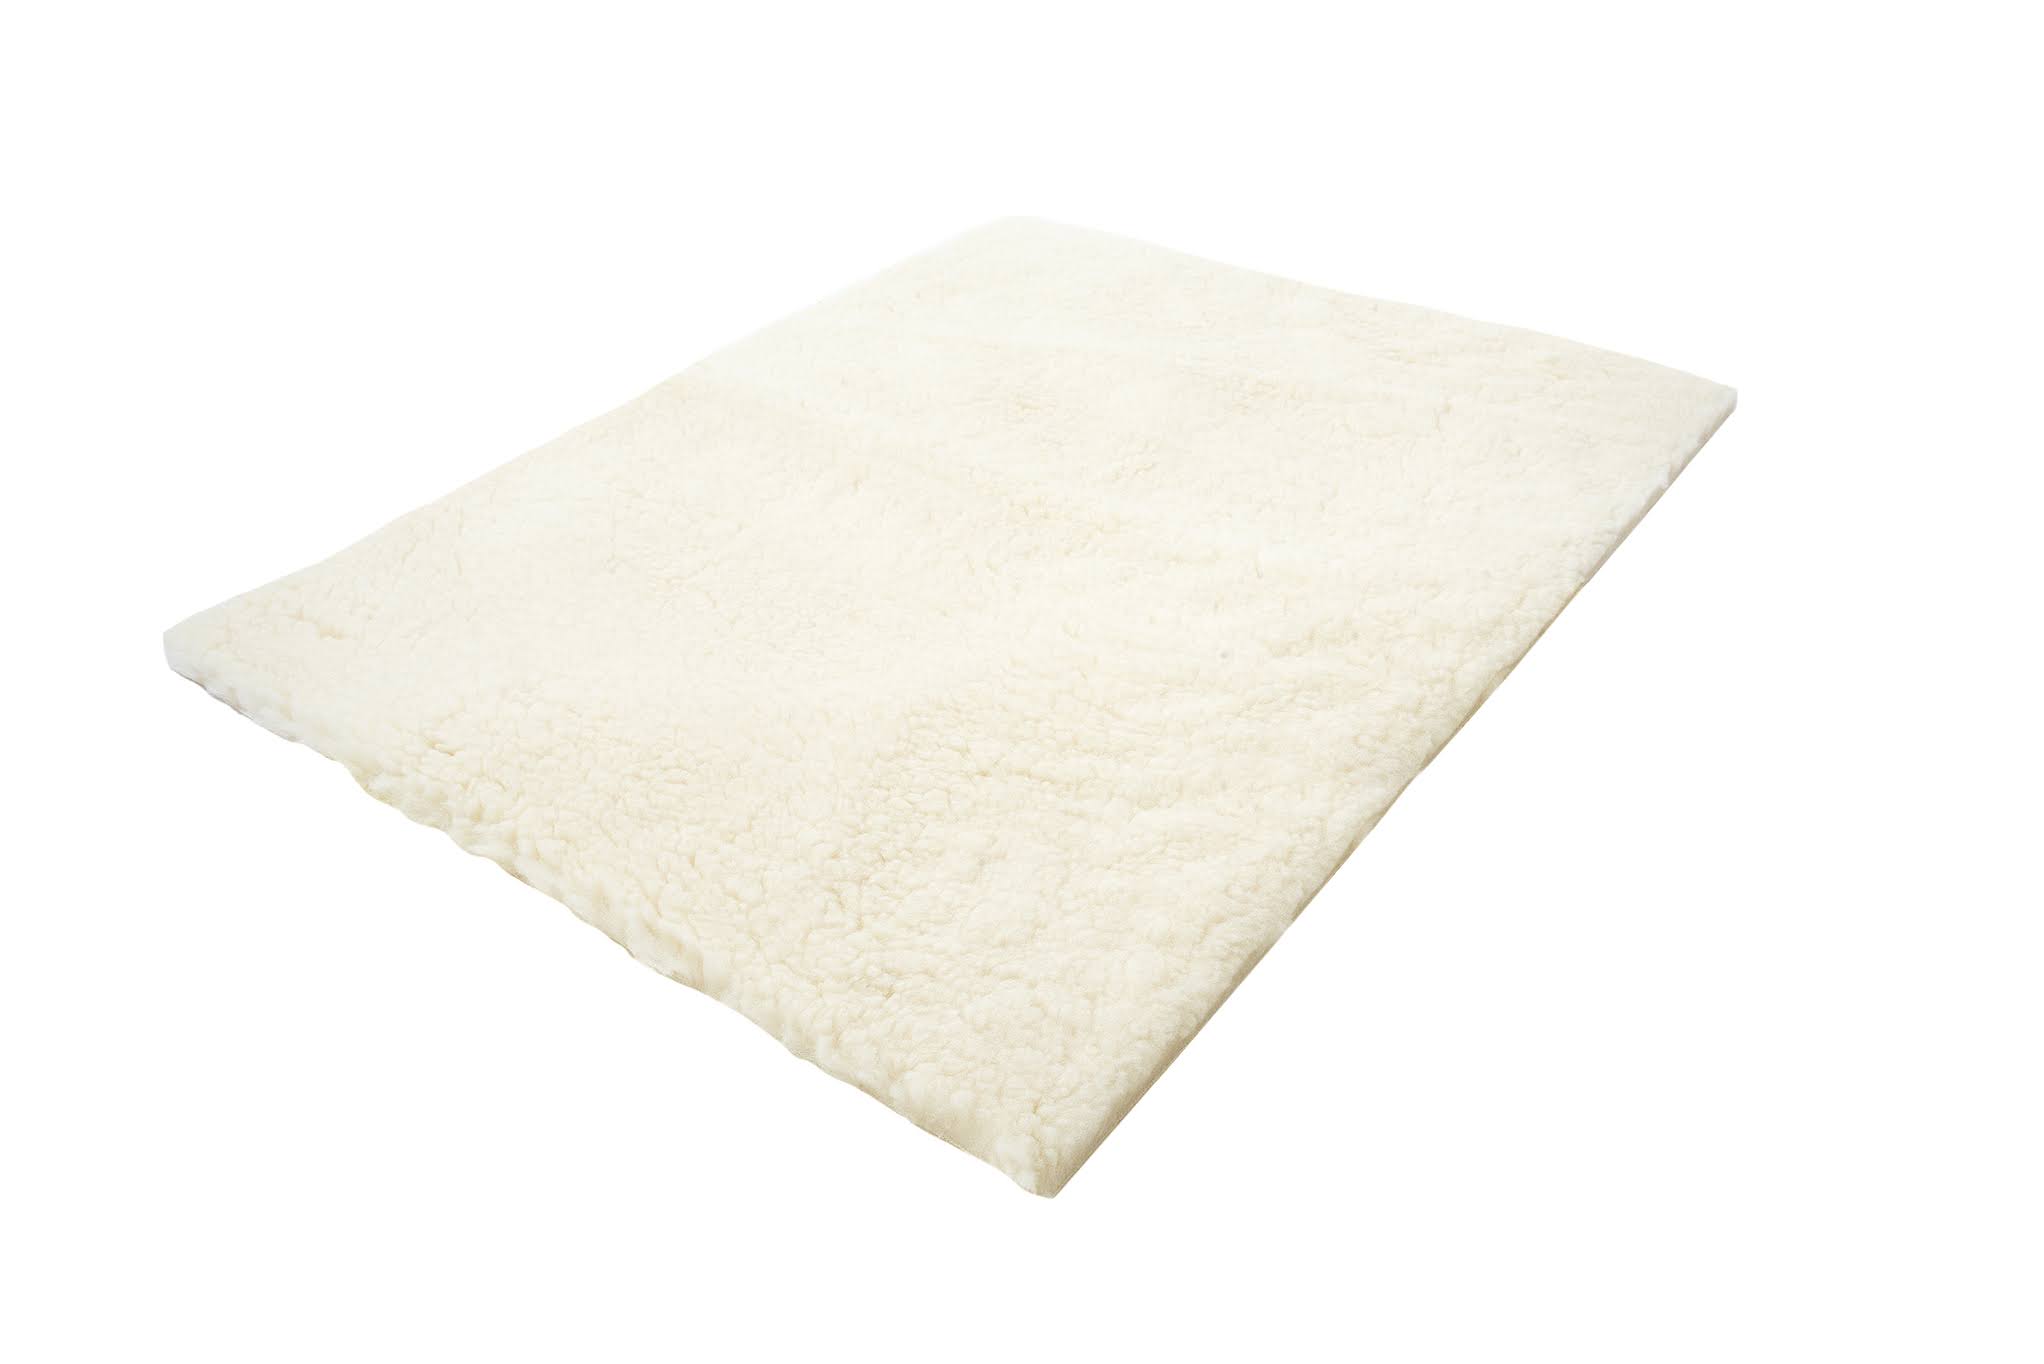 Essential Medical Supply Sheepette Synthetic Lambskin - 30" x 40"